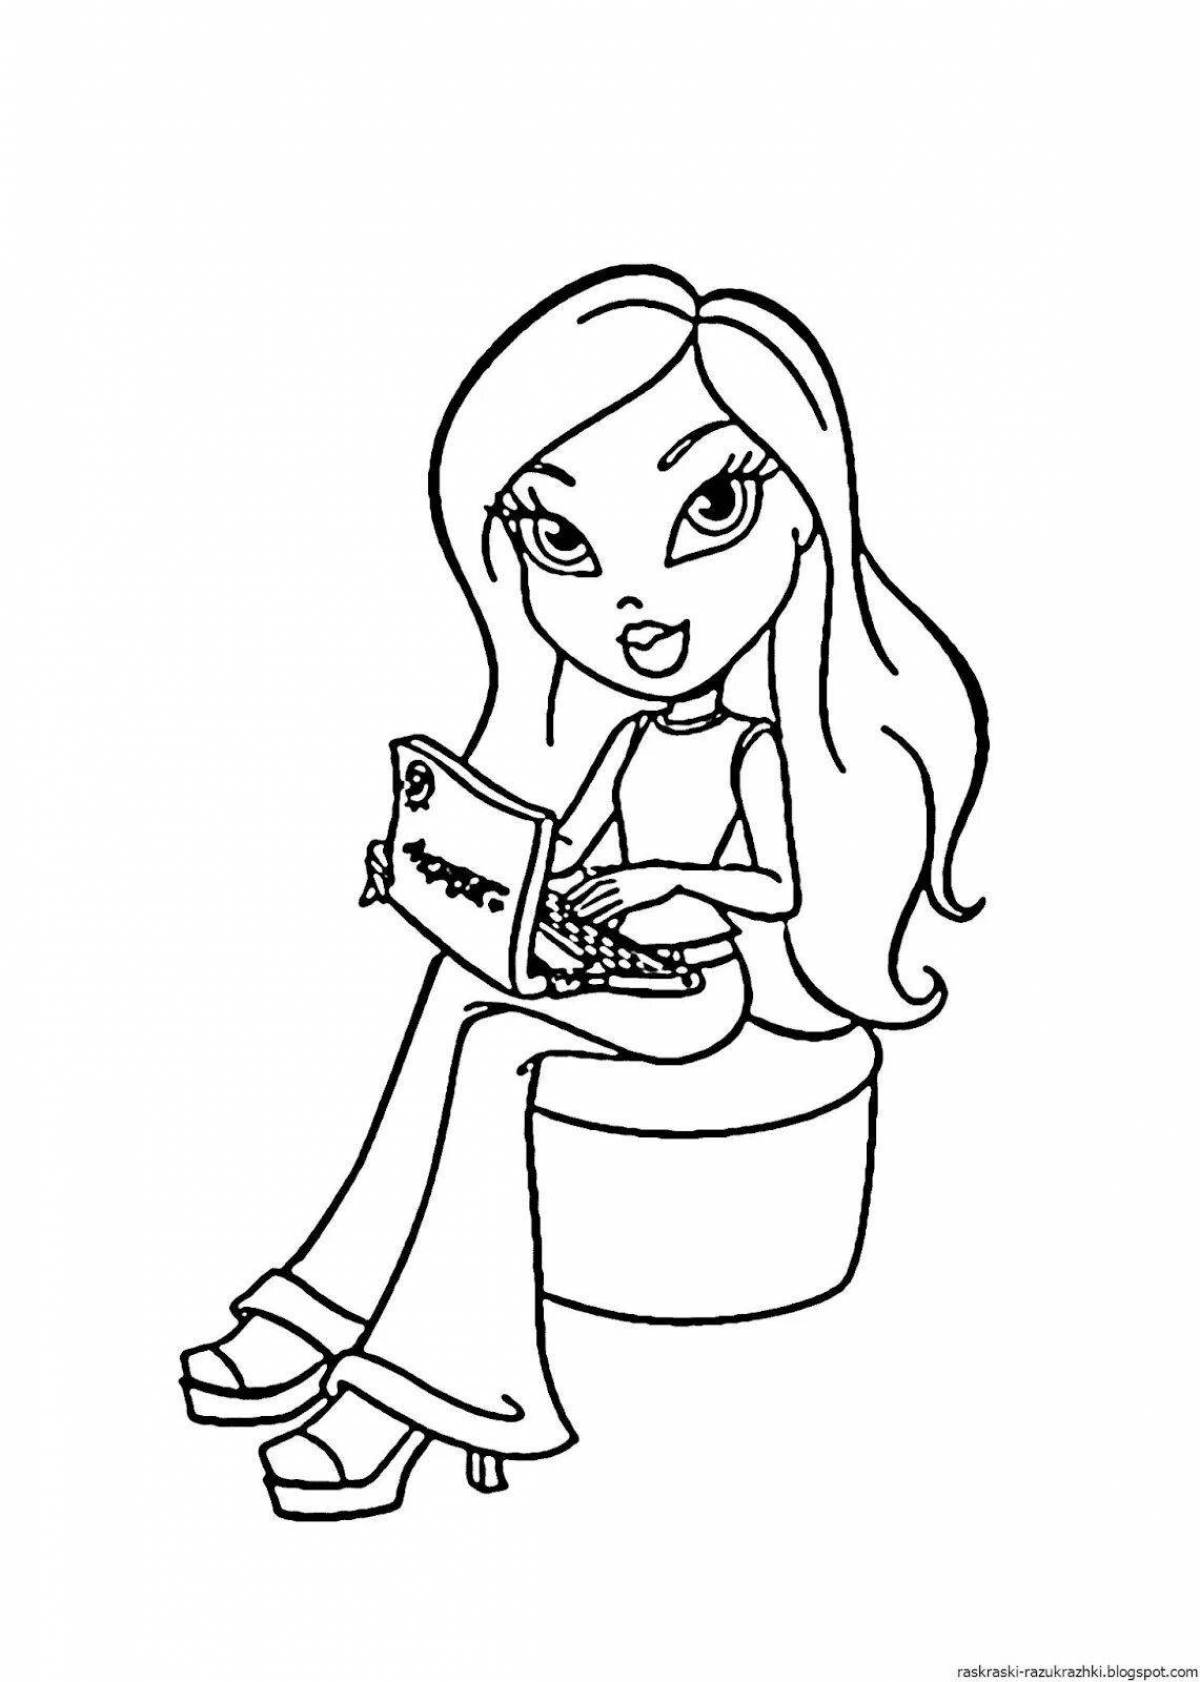 Amazing printer coloring page